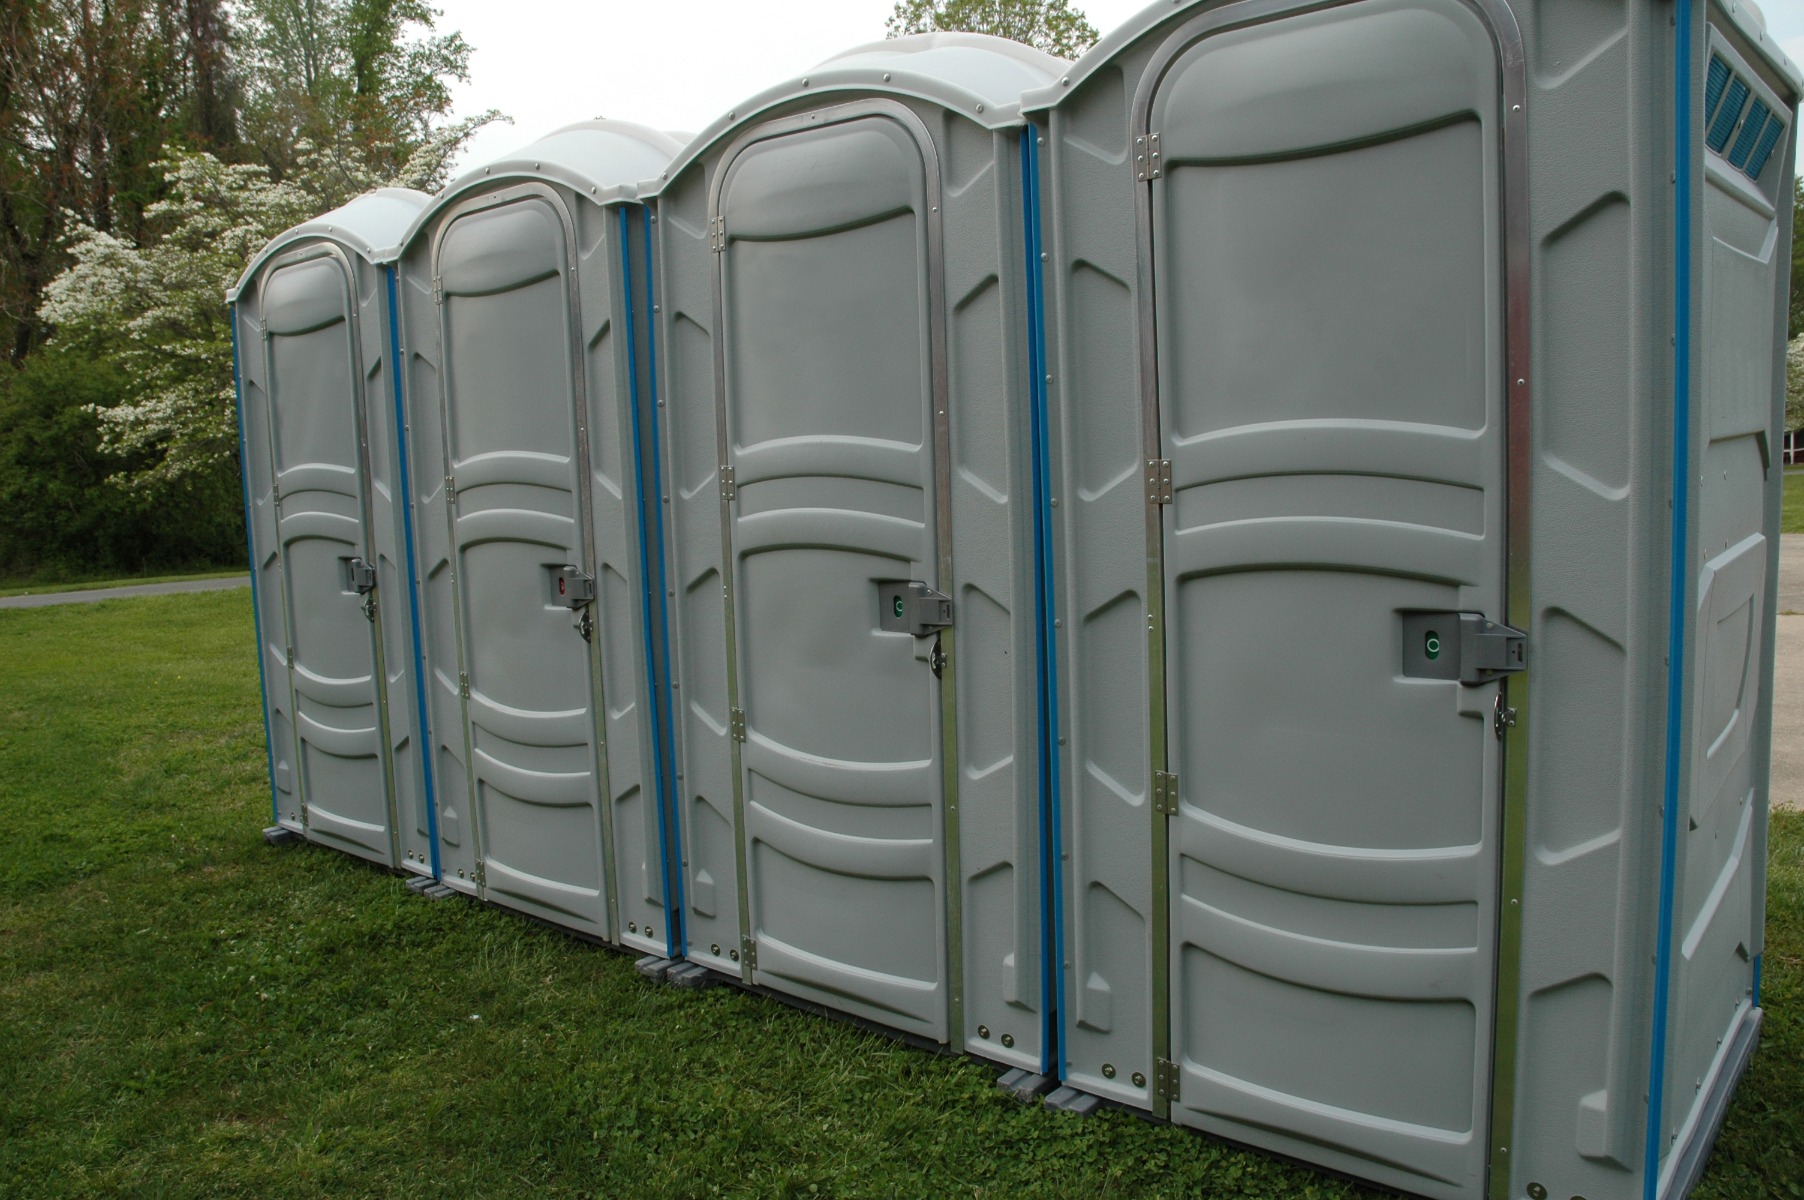 Sports Events and Portable Restroom Rentals: Portable Toilet Rentals vs Porta Potty Rental